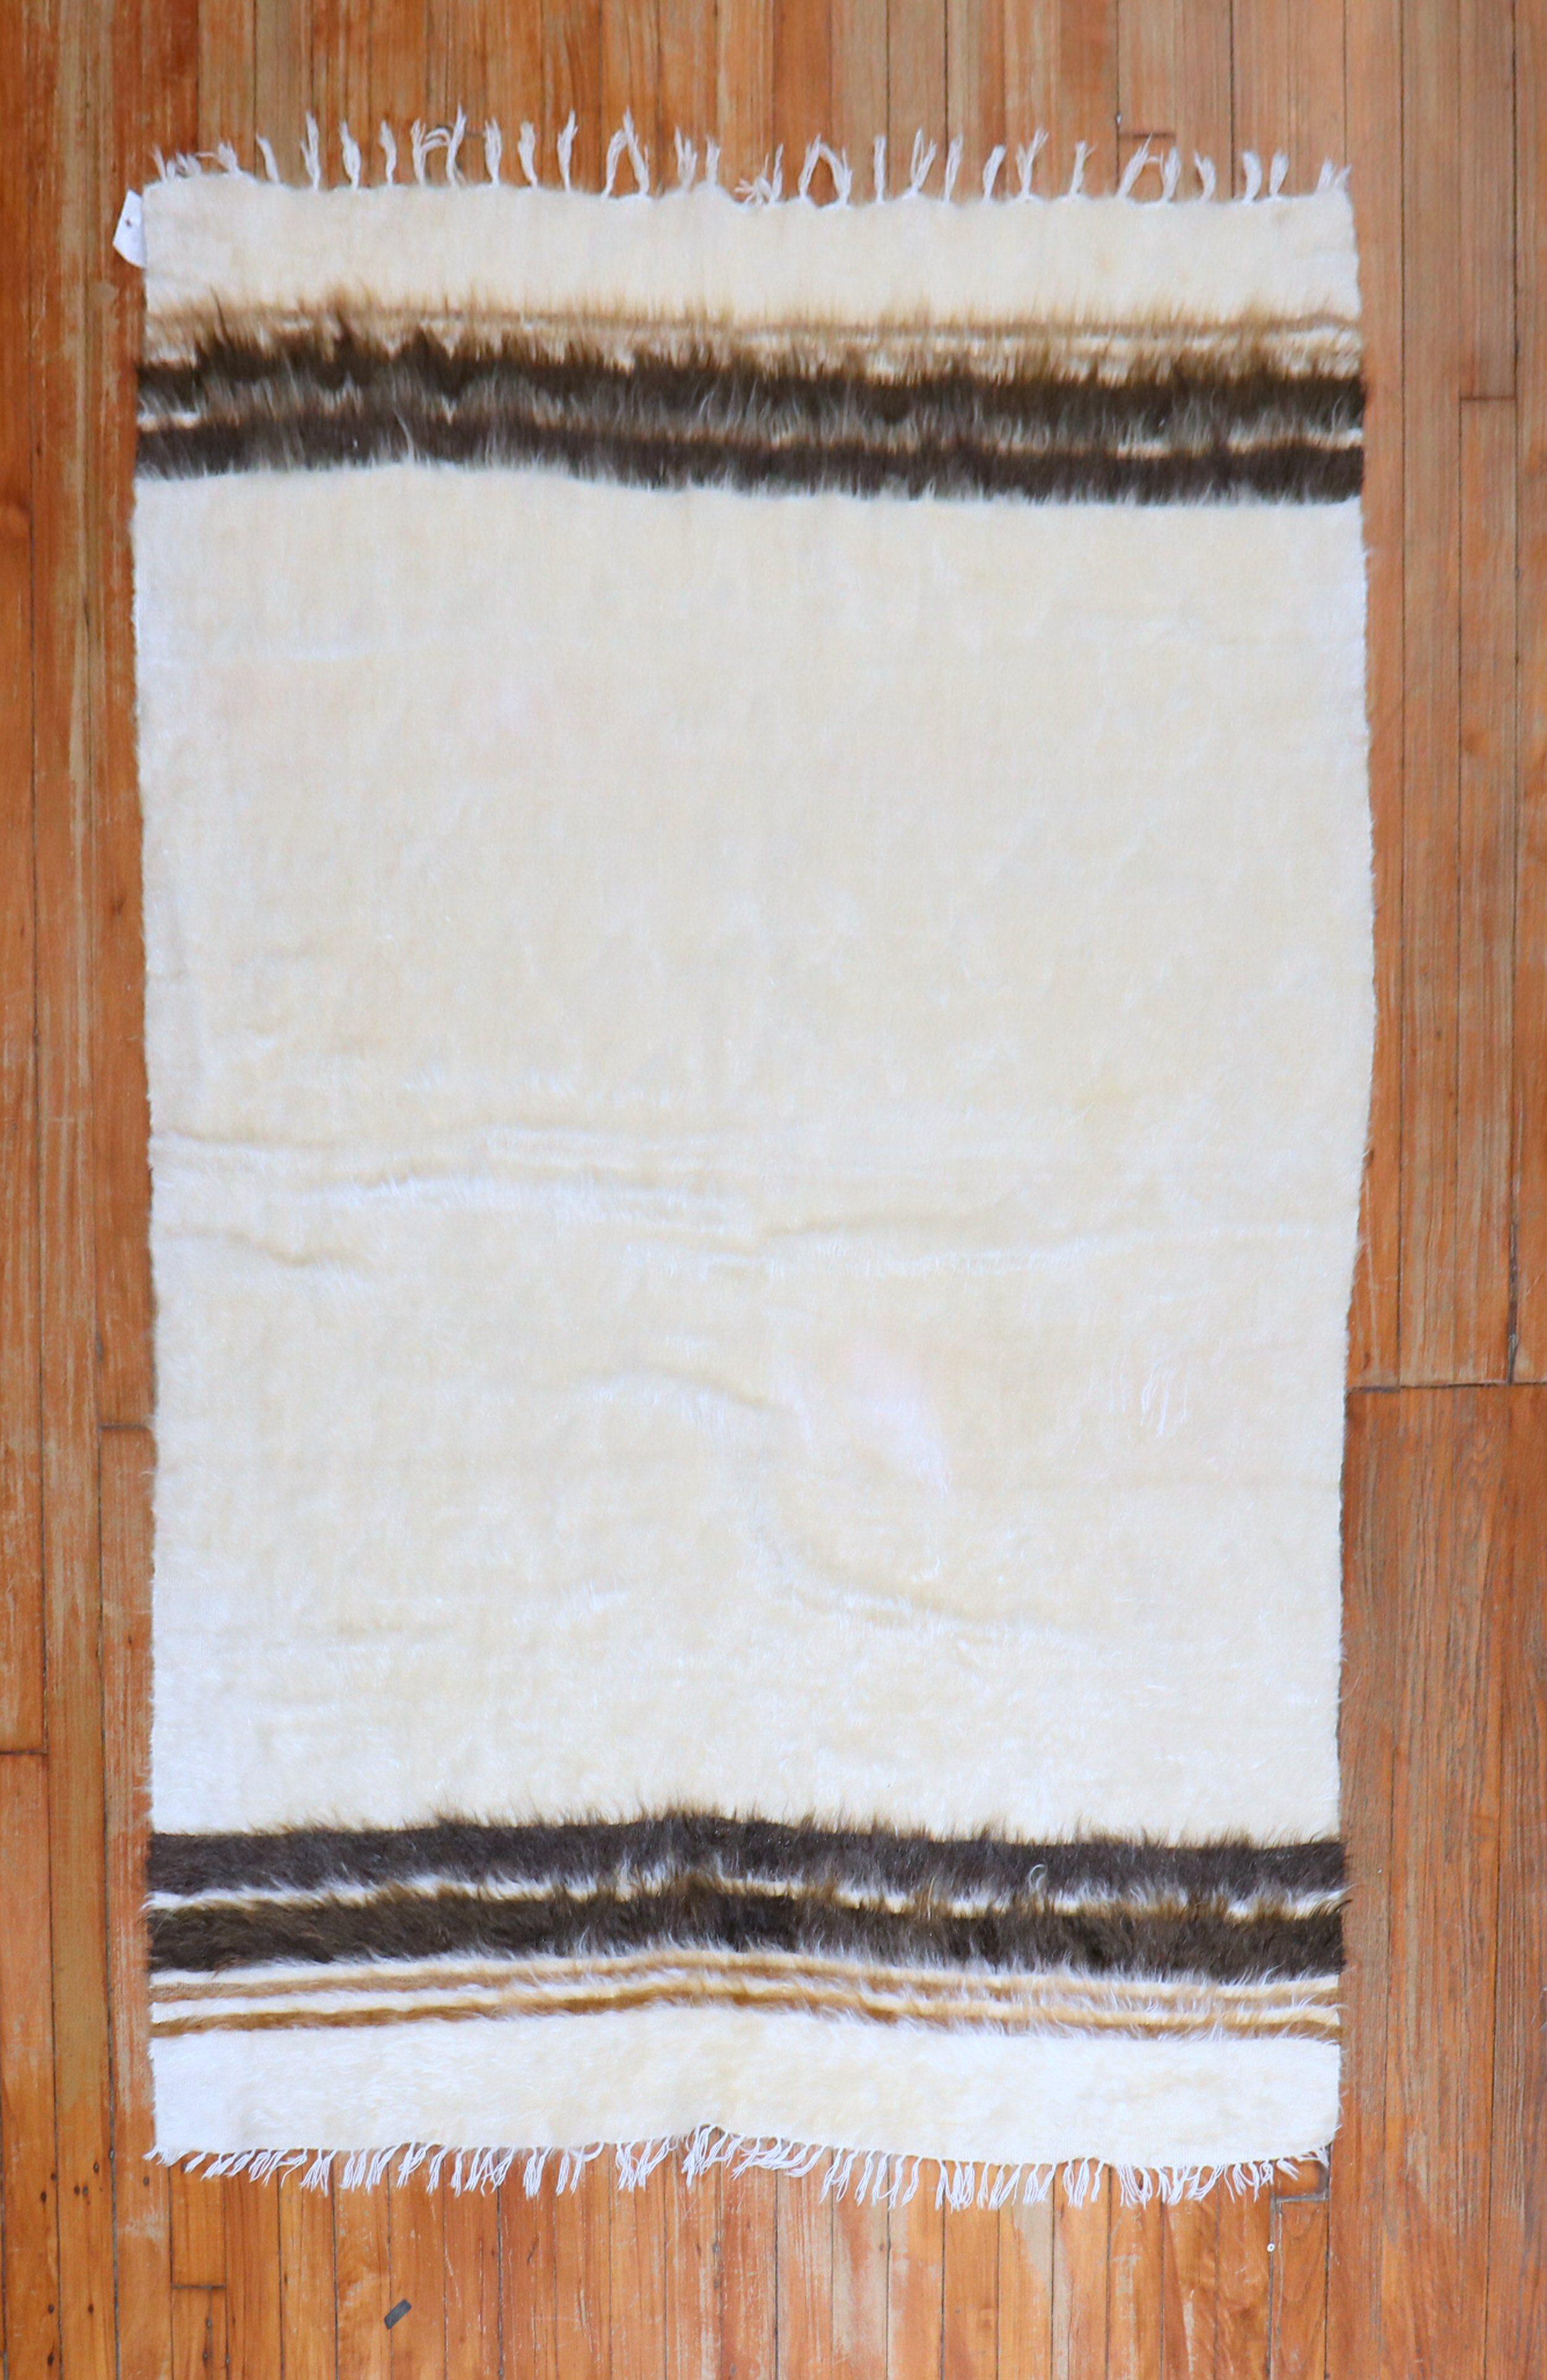 A mid 20th Century Turkish Mohair rug in ivory, brown and black

Measures: 4' x 5'10''.